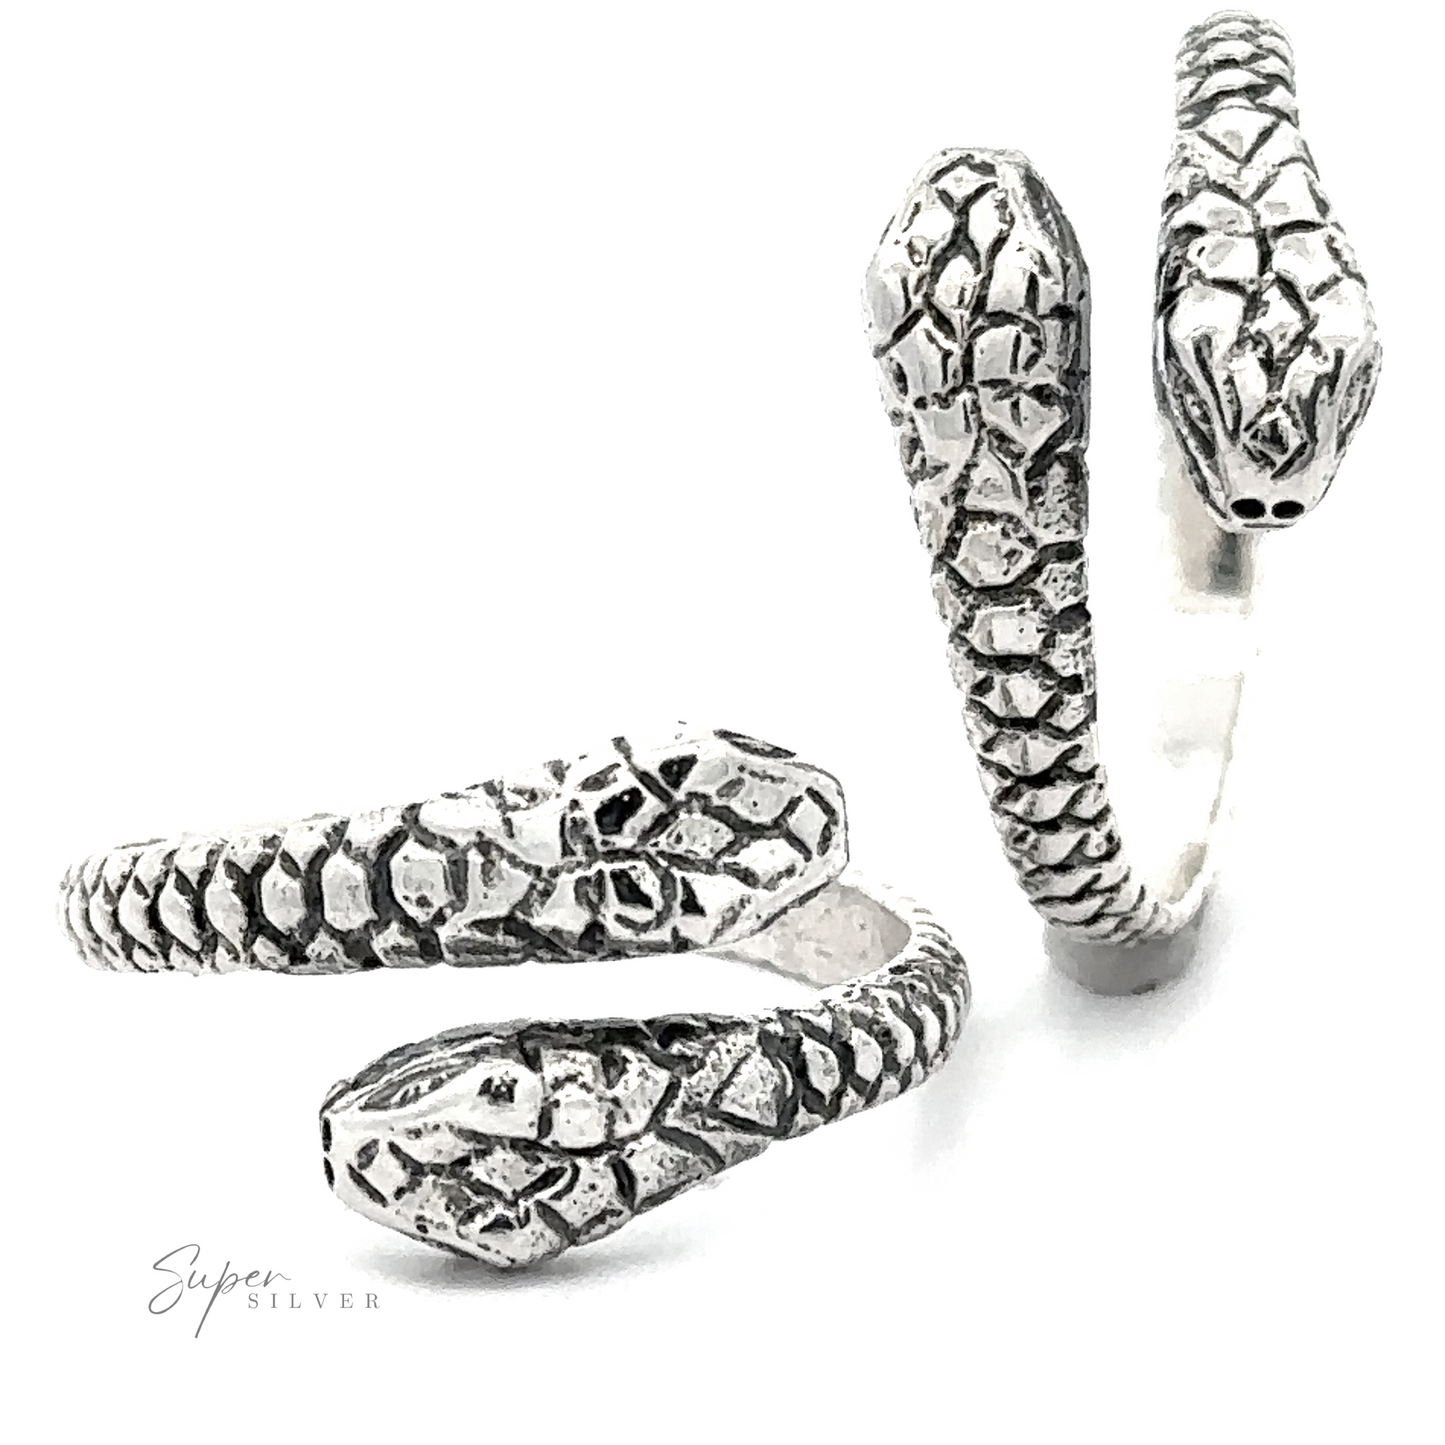 
                  
                    A Sterling Silver Two Headed Snake Ring with detailed scale textures, an open-mouth design at one end, and curled tail at the other, on a white background.
                  
                